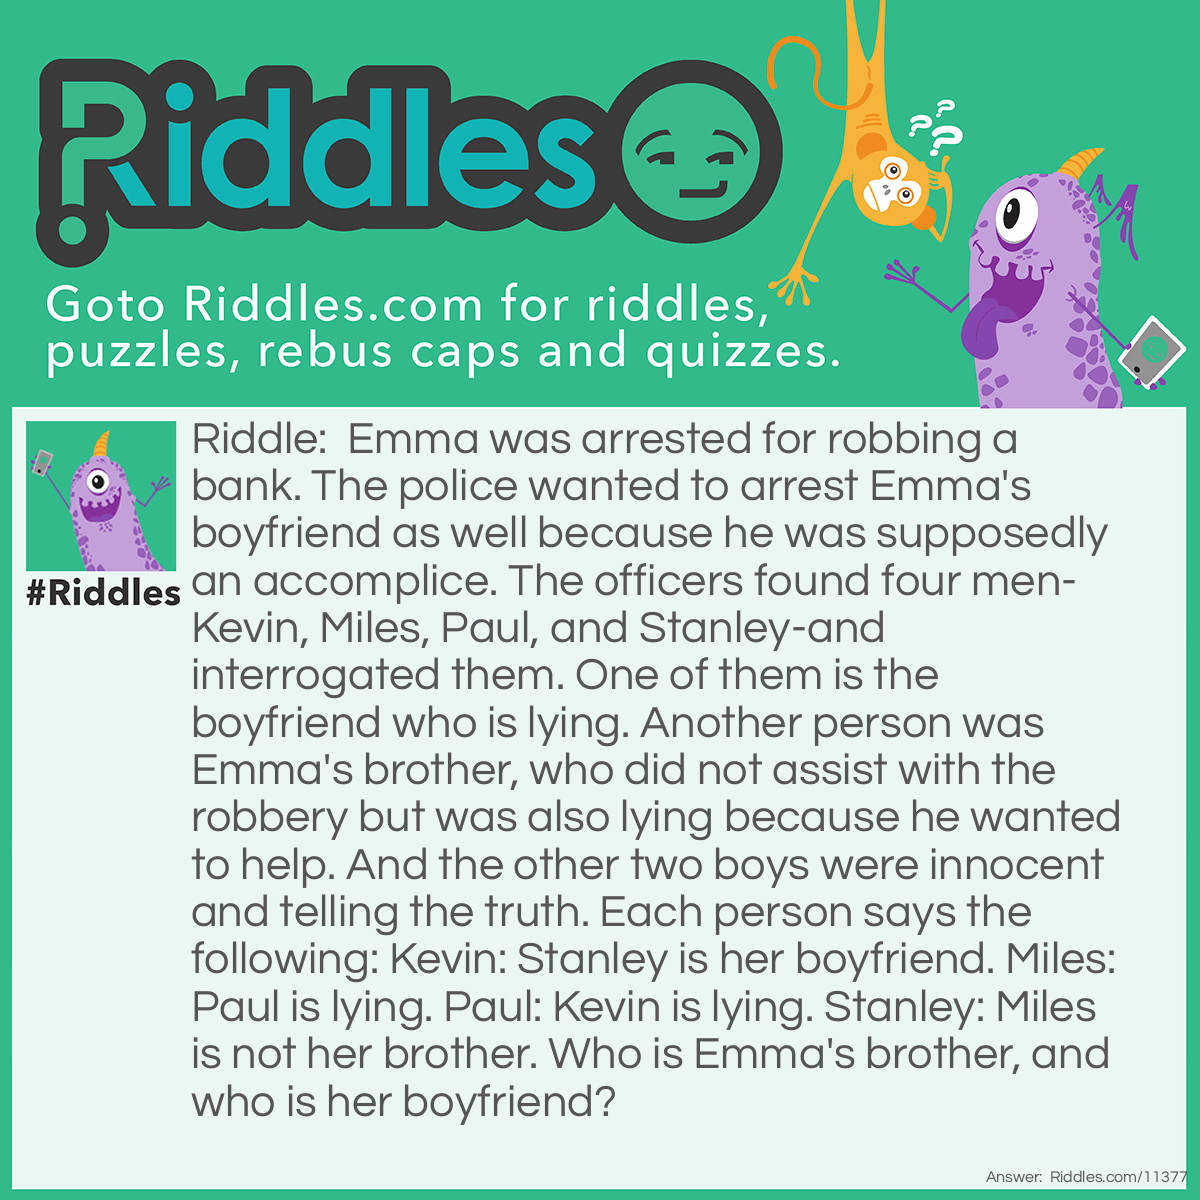 Riddle: Emma was arrested for robbing a bank. The police wanted to arrest Emma's boyfriend as well because he was supposedly an accomplice. The officers found four men-Kevin, Miles, Paul, and Stanley-and interrogated them. One of them is the boyfriend who is lying. Another person was Emma's brother, who did not assist with the robbery but was also lying because he wanted to help. And the other two boys were innocent and telling the truth. Each person says the following: Kevin: Stanley is her boyfriend. Miles: Paul is lying. Paul: Kevin is lying. Stanley: Miles is not her brother. Who is Emma's brother, and who is her boyfriend? Answer: Kevin is Emma's brother, and Miles is her boyfriend. If Kevin is telling the truth, then Stanley is lying because the boyfriend lies. This means Miles is also lying because according to these conditions, Miles IS the brother who is lying. But then, Paul is telling the truth. It contradicts that Kevin is telling the truth because both of them cannot be truthful at the same time. So, Kevin is lying, Paul is telling the truth, and Miles is lying. By default, Stanley is the other man telling the truth. The two liars are Kevin and Miles; they are Emma's boyfriend and brother. Since Stanley said that Miles is NOT her brother, and that statement is true, it means Kevin is her brother, and Miles is her boyfriend.